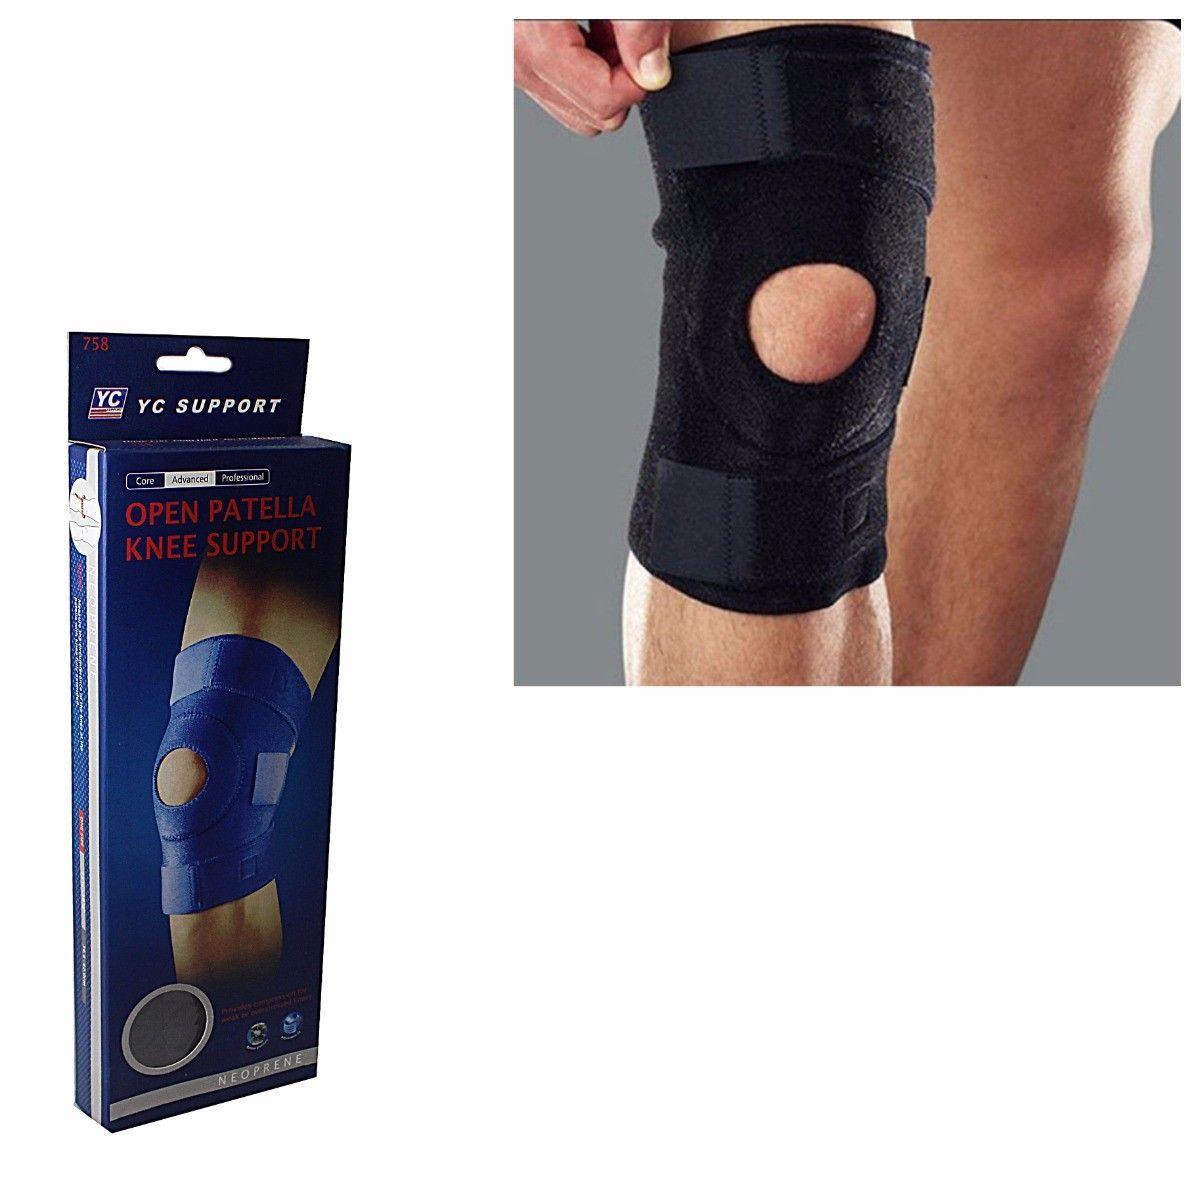 Open Patella Knee Support For Men And Women 9998 (Large Letter Rate)